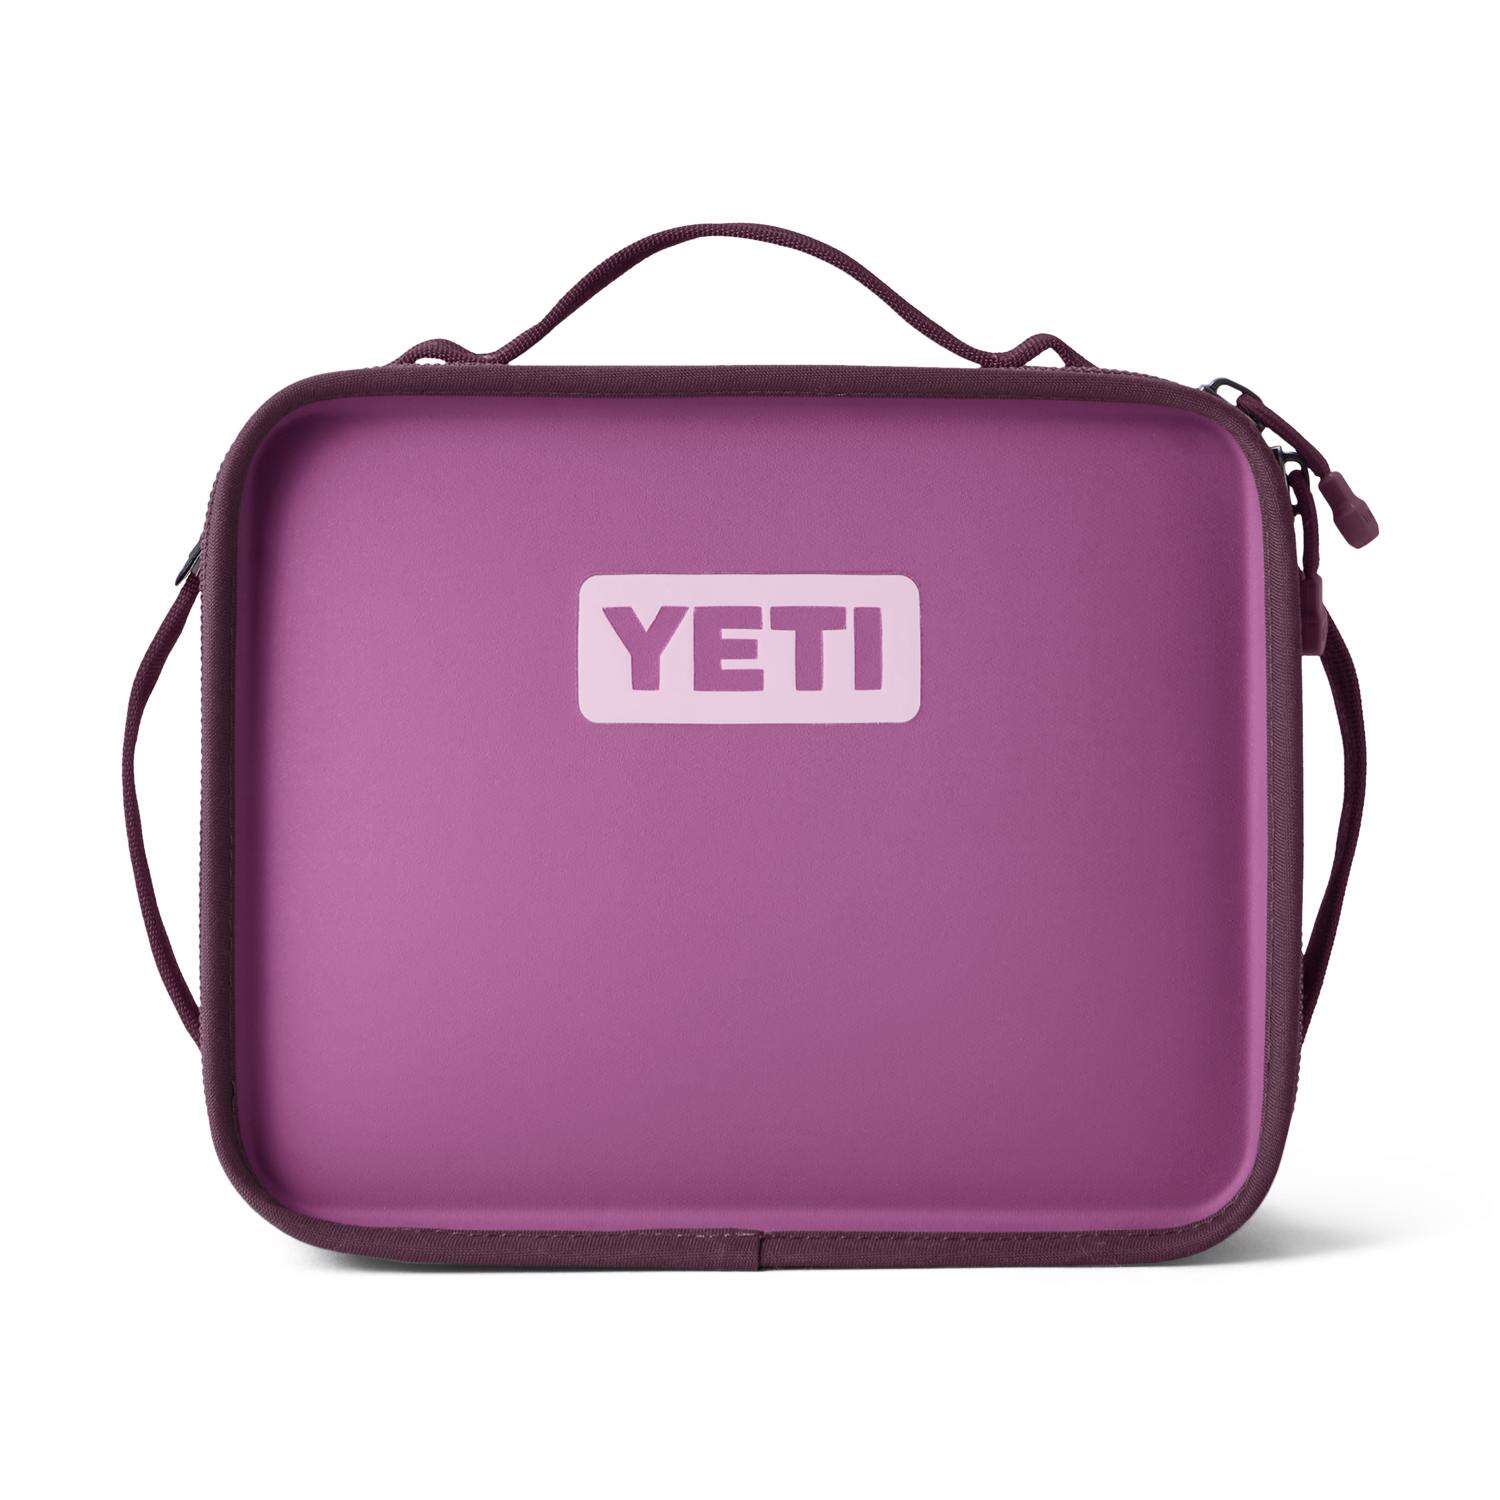 YETI CORAL 🪸 DayTrip Lunch Box - Limited Edition Color - NWT RARE